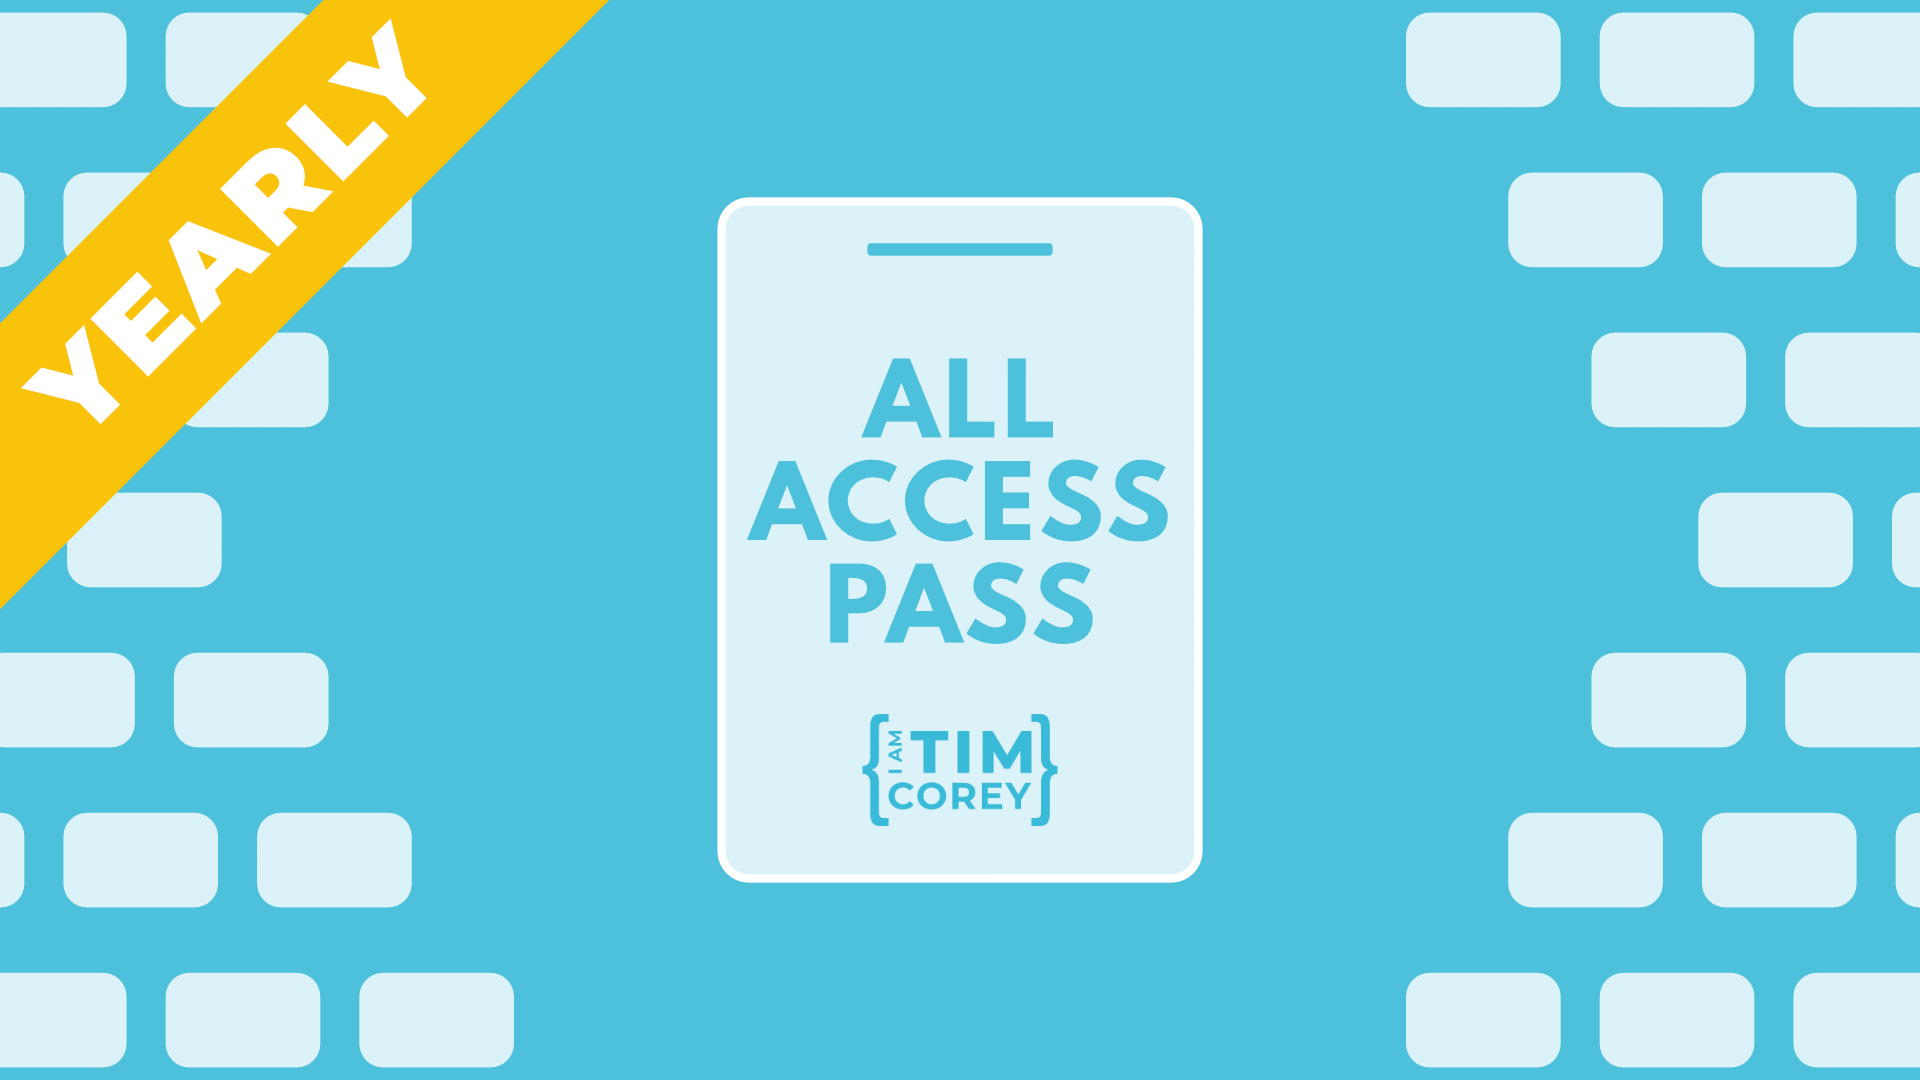 All Access Pass Yearly Subscription Overview Card